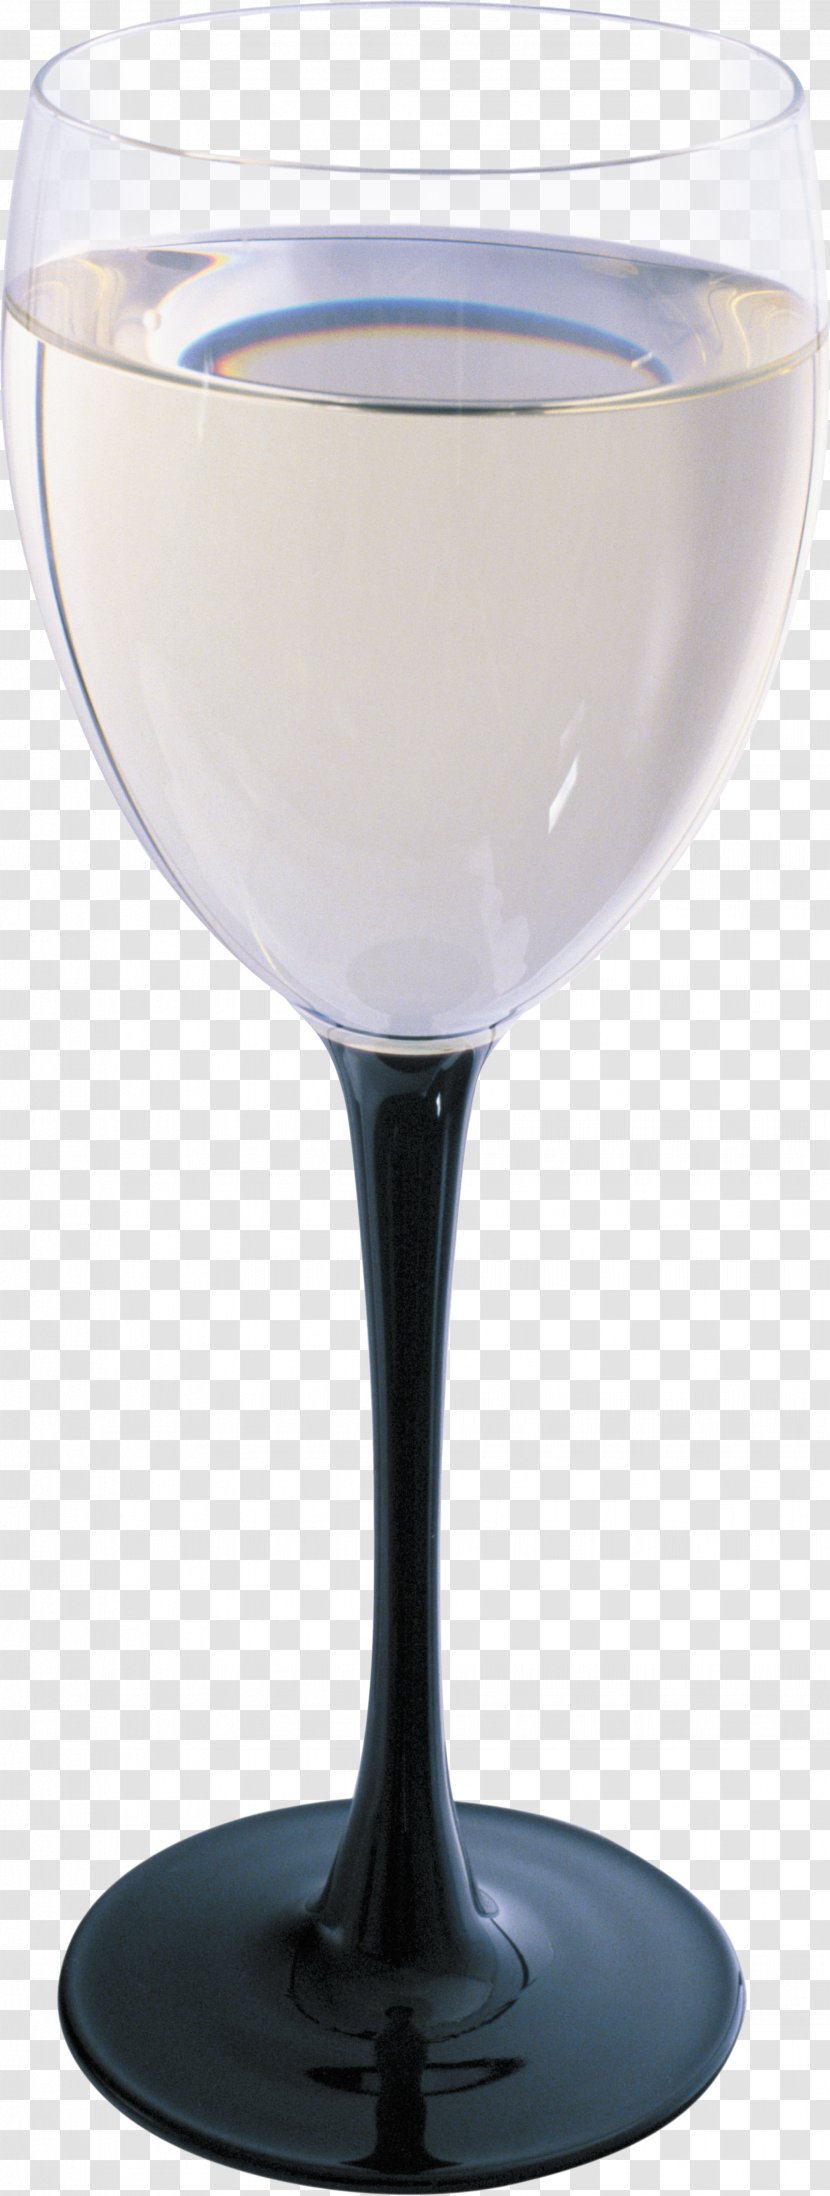 Cocktail Wine Glass Champagne Martini - Drinkware - Image Transparent PNG